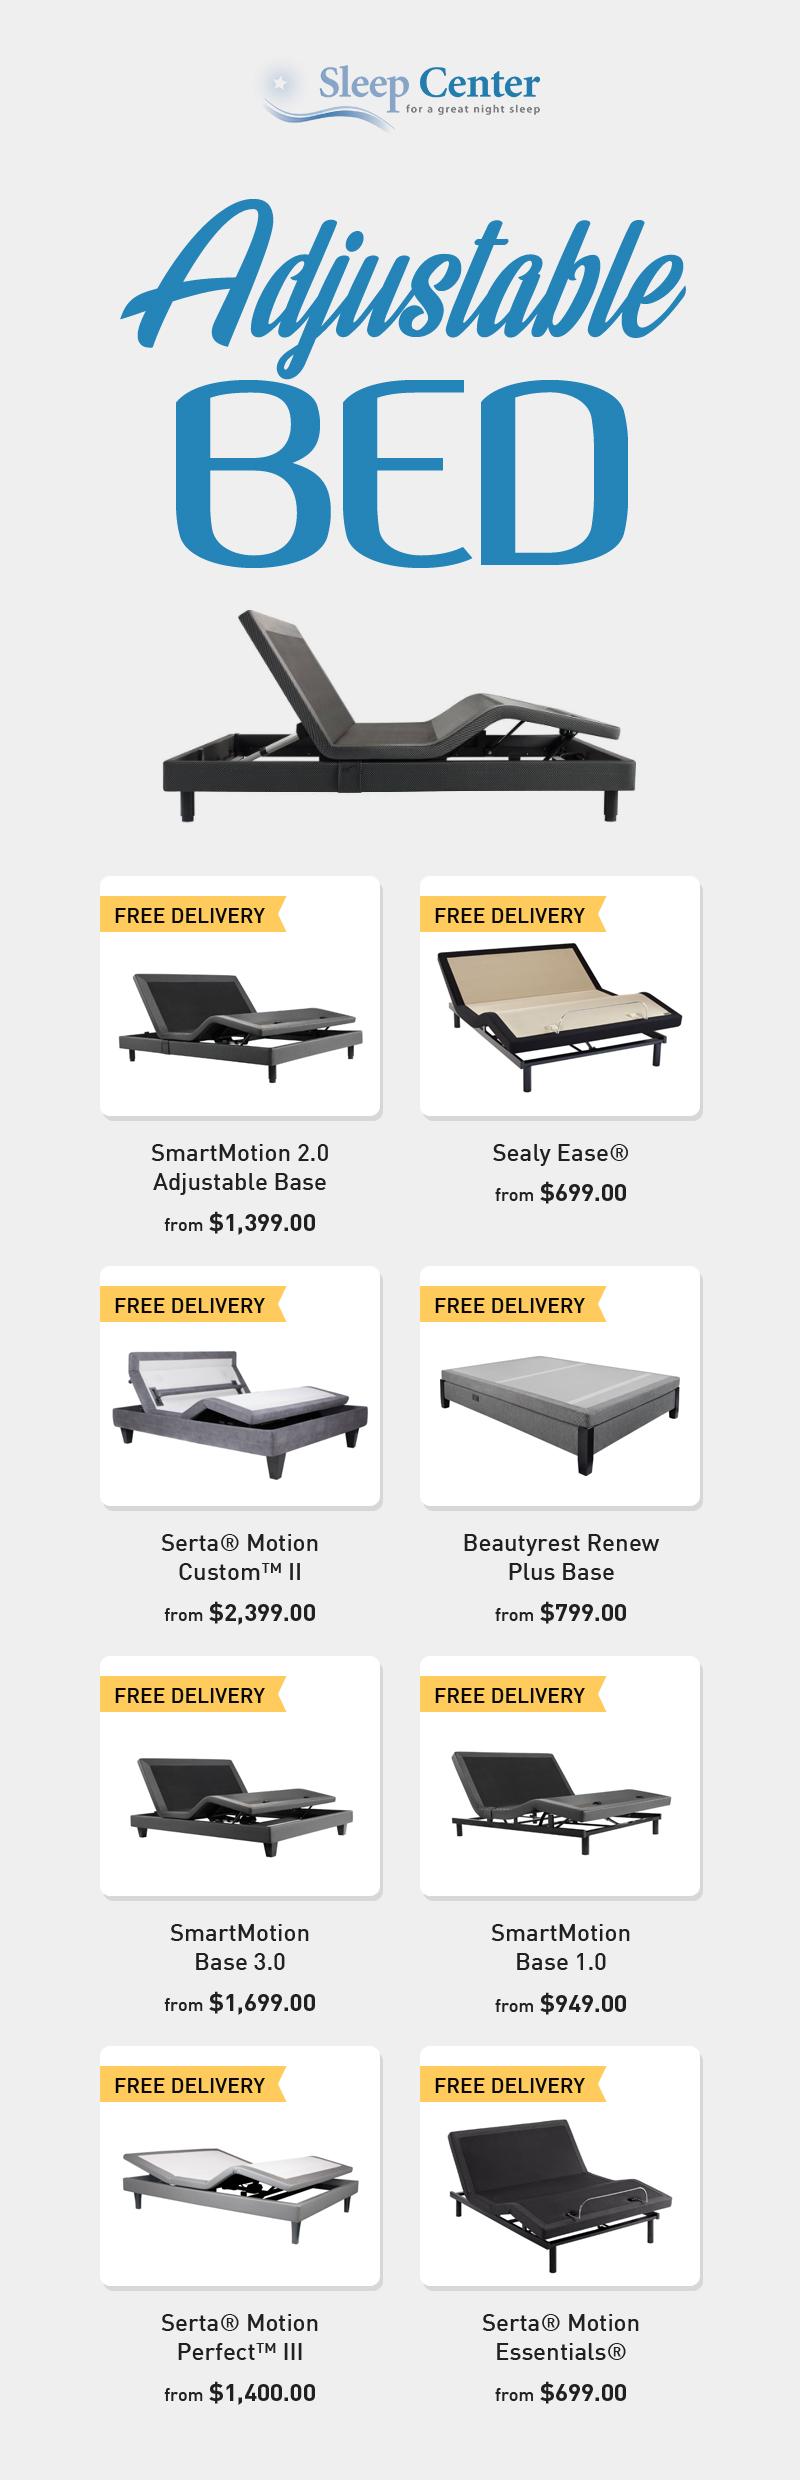 Shop the Best Quality Adjustable Beds from Sleep Center